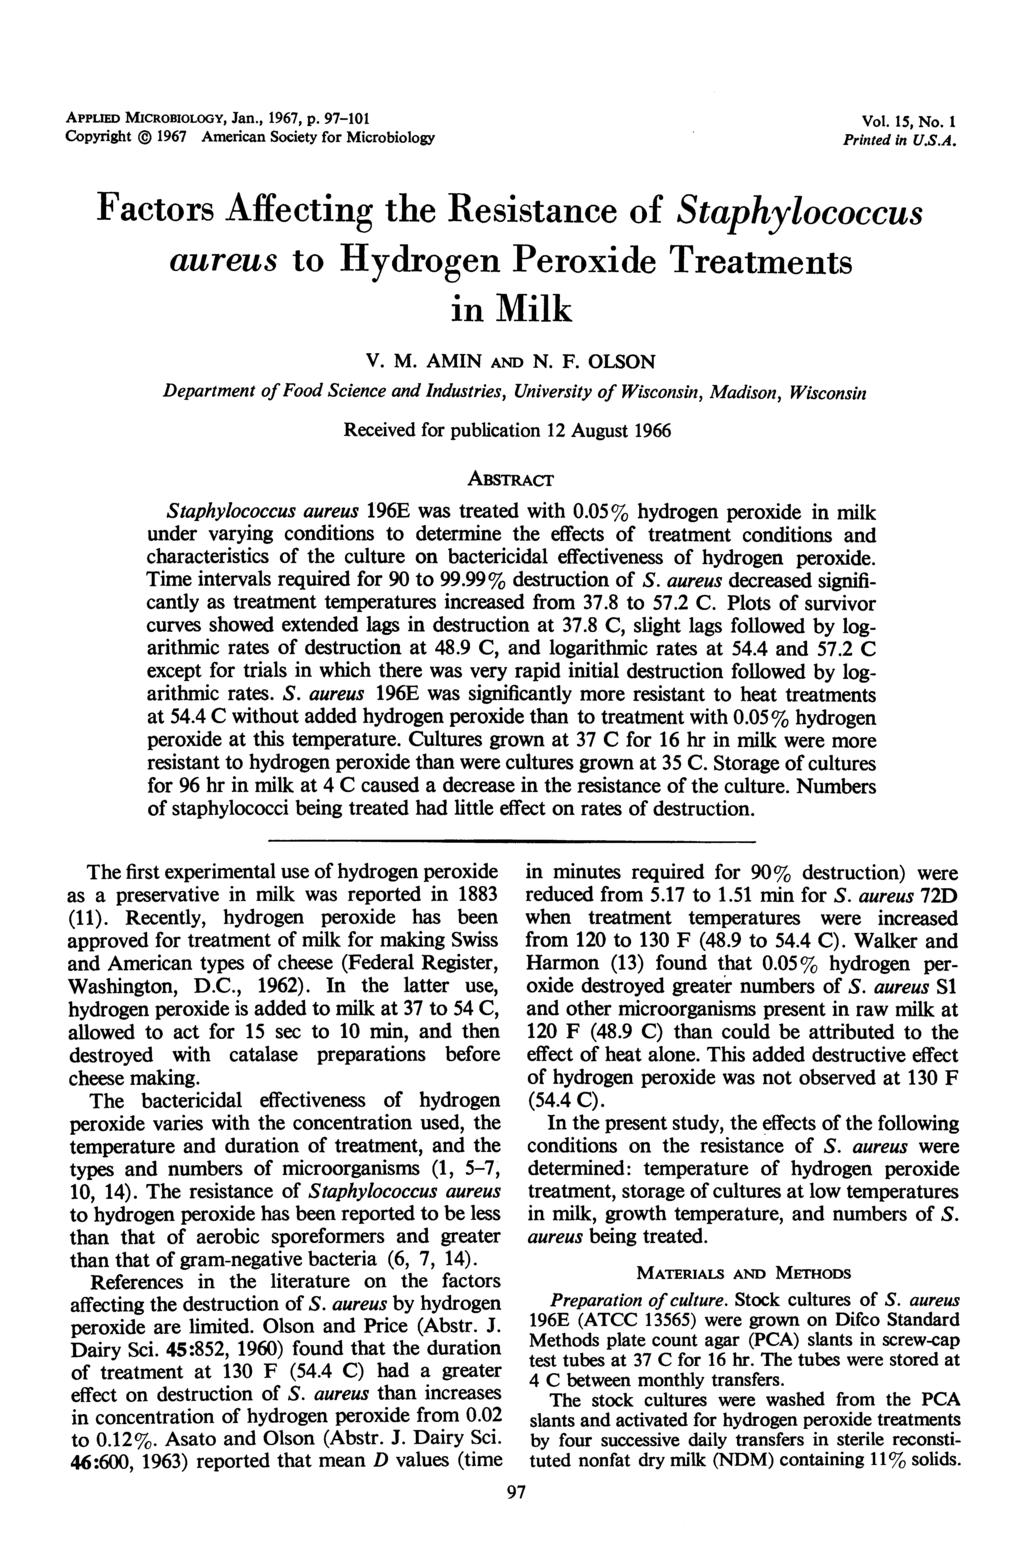 APPLIED MICROBIOLOGY, Jan., 1967, p. 97-101 Copyright 1967 American Society for Microbiology Vol. 15, No. 1 Printed in U.S.A. Factors Affecting the Resistance of Staphylococcus aureus to Hydrogen Peroxide Treatments in Milk V.